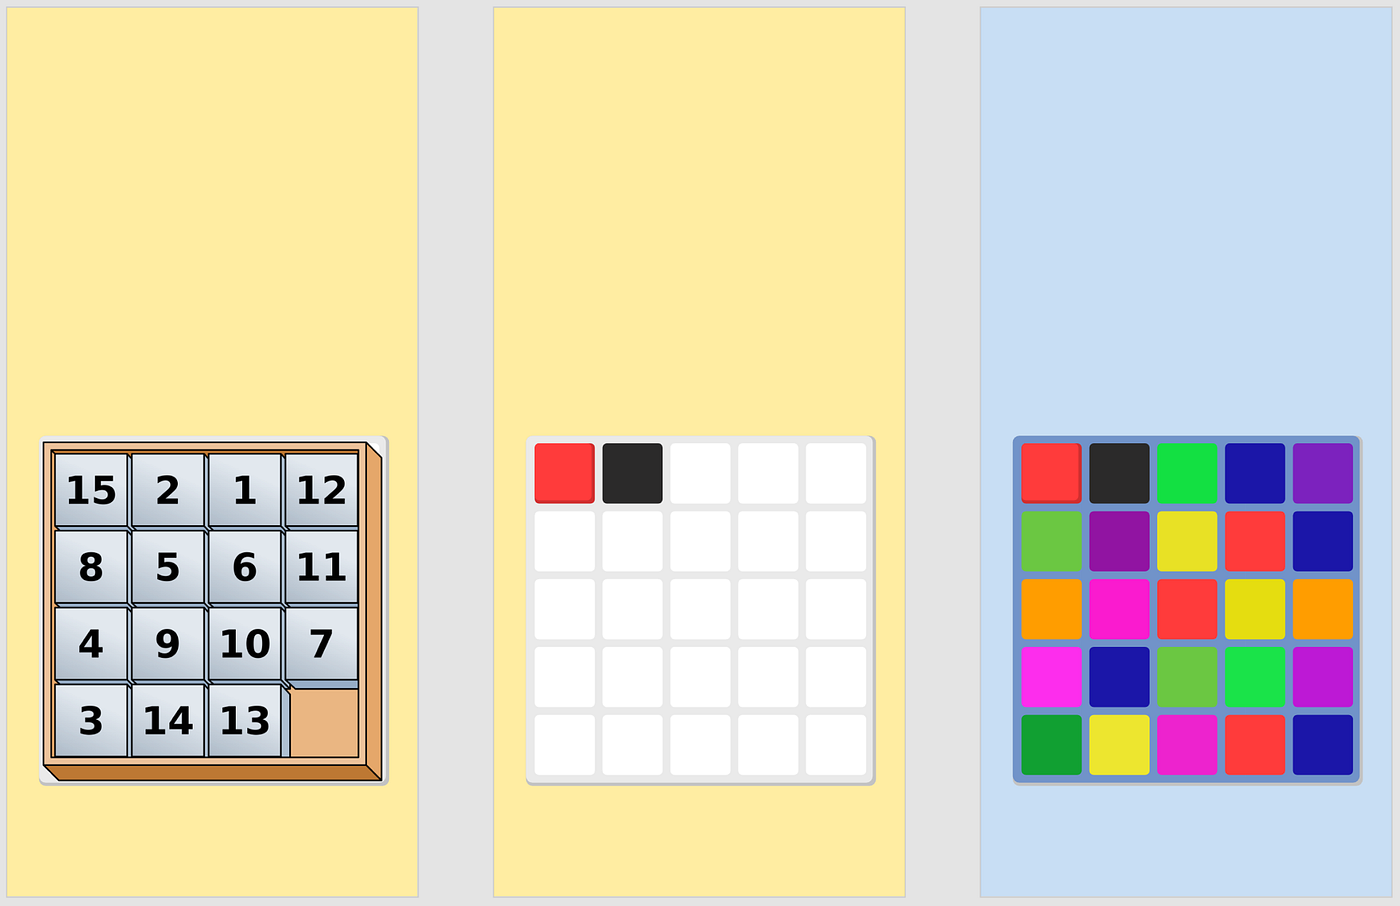 Swift Block released their new sliding puzzle thingy I guess